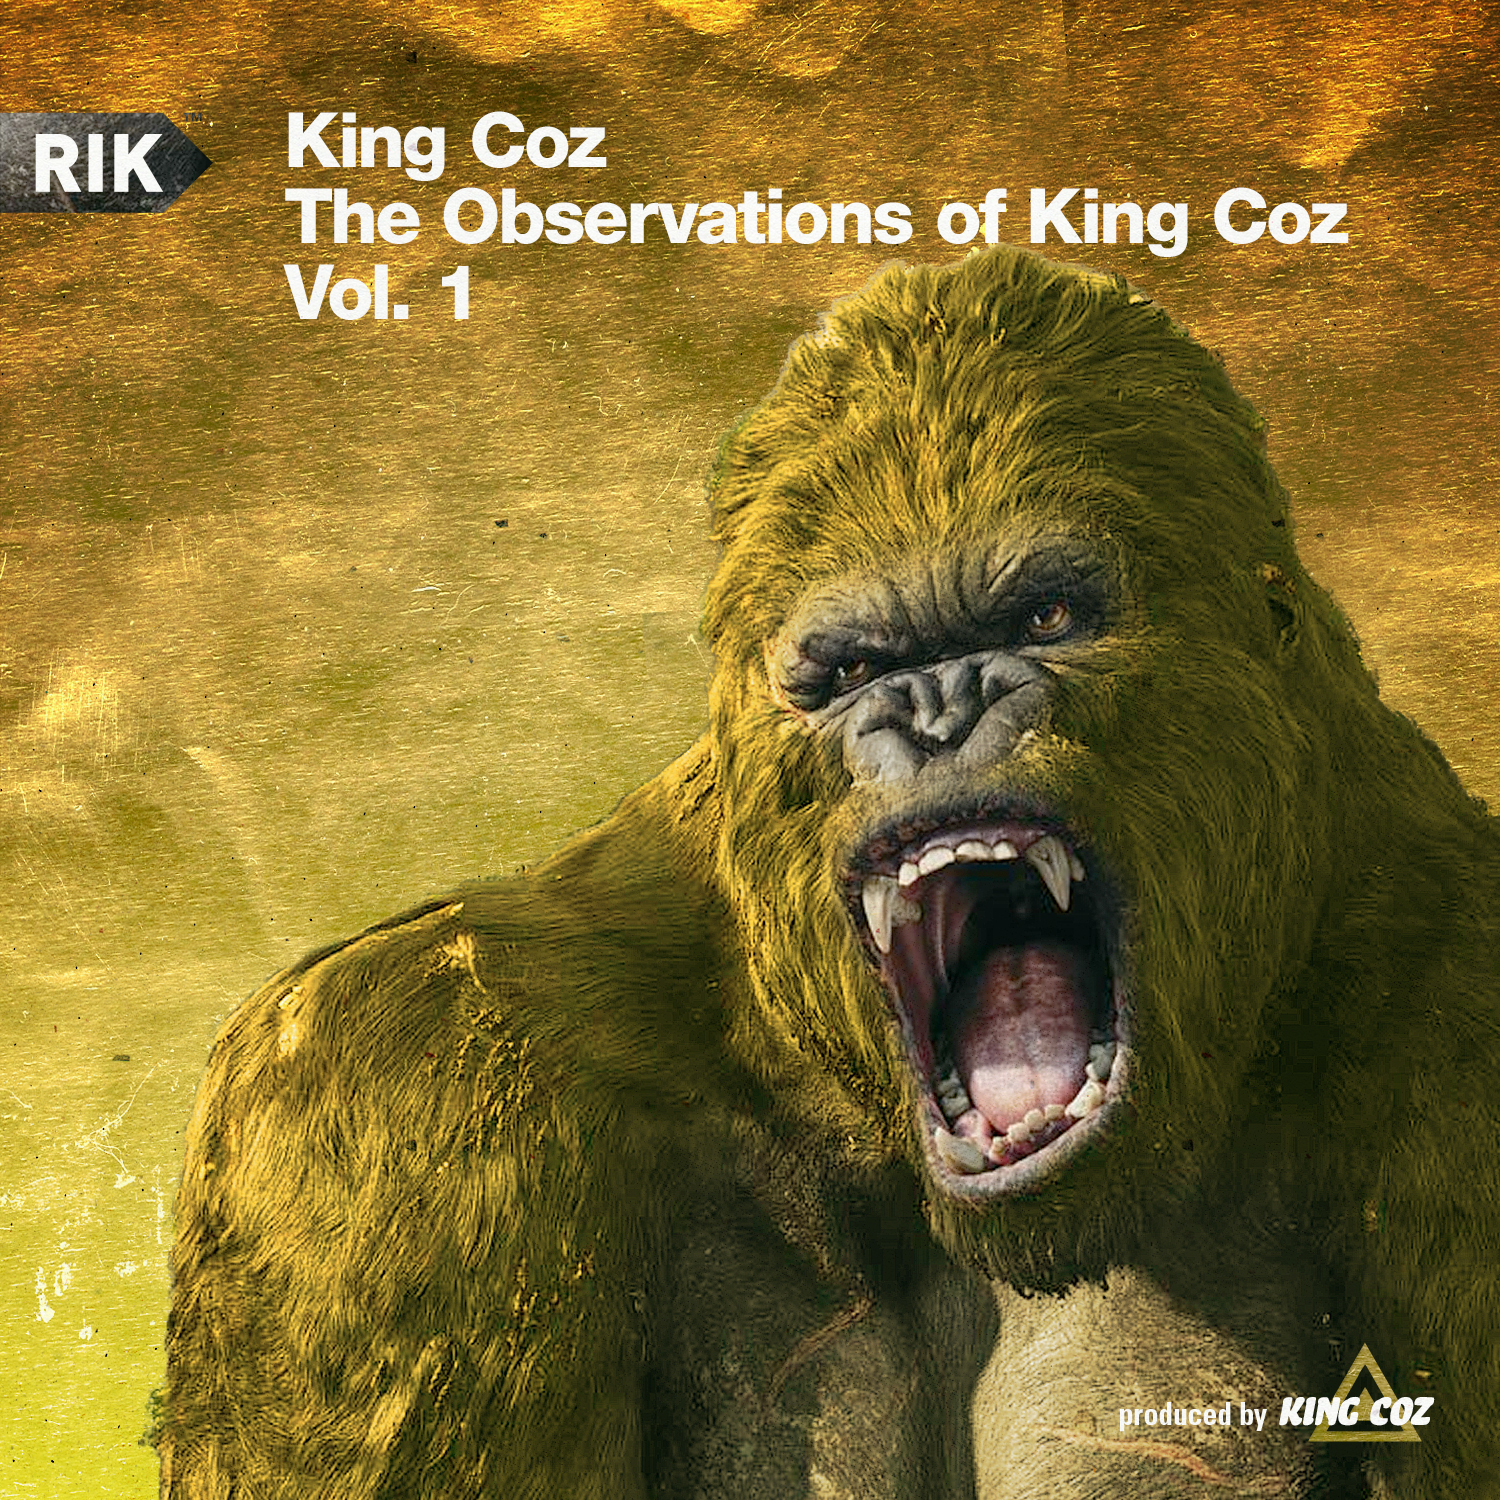 King Coz — The Observations of King Coz Vol. 1